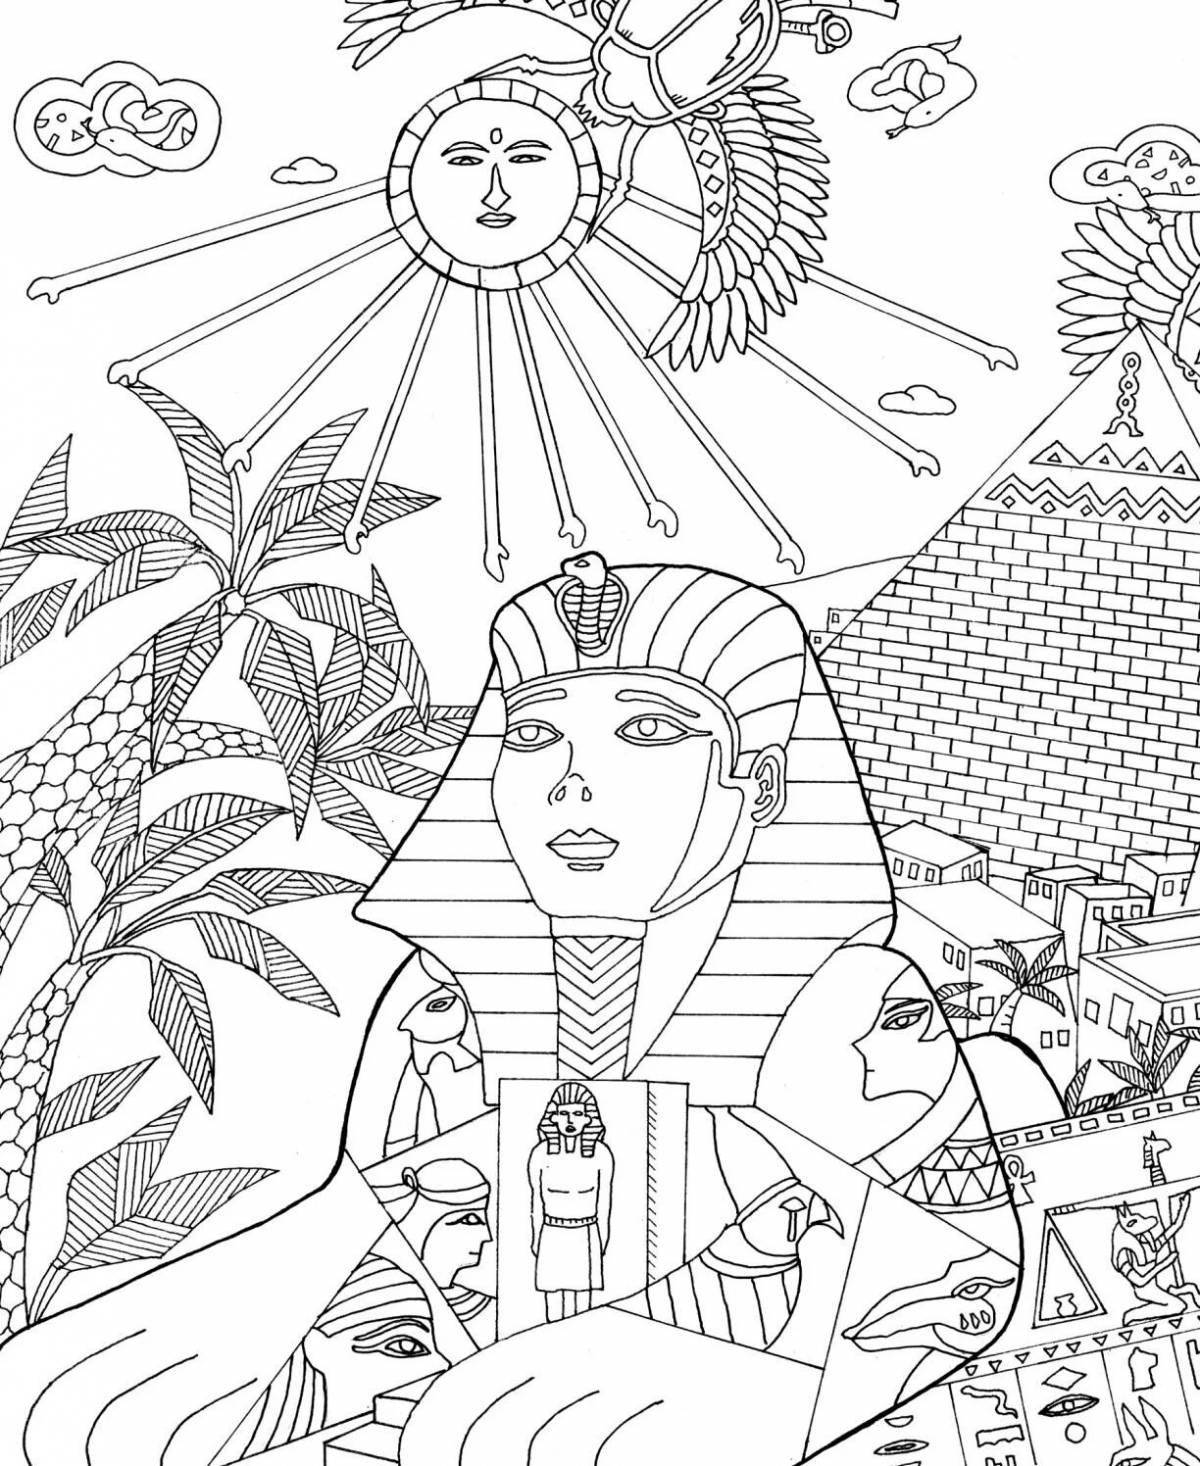 Adorable Egyptian coloring book for kids